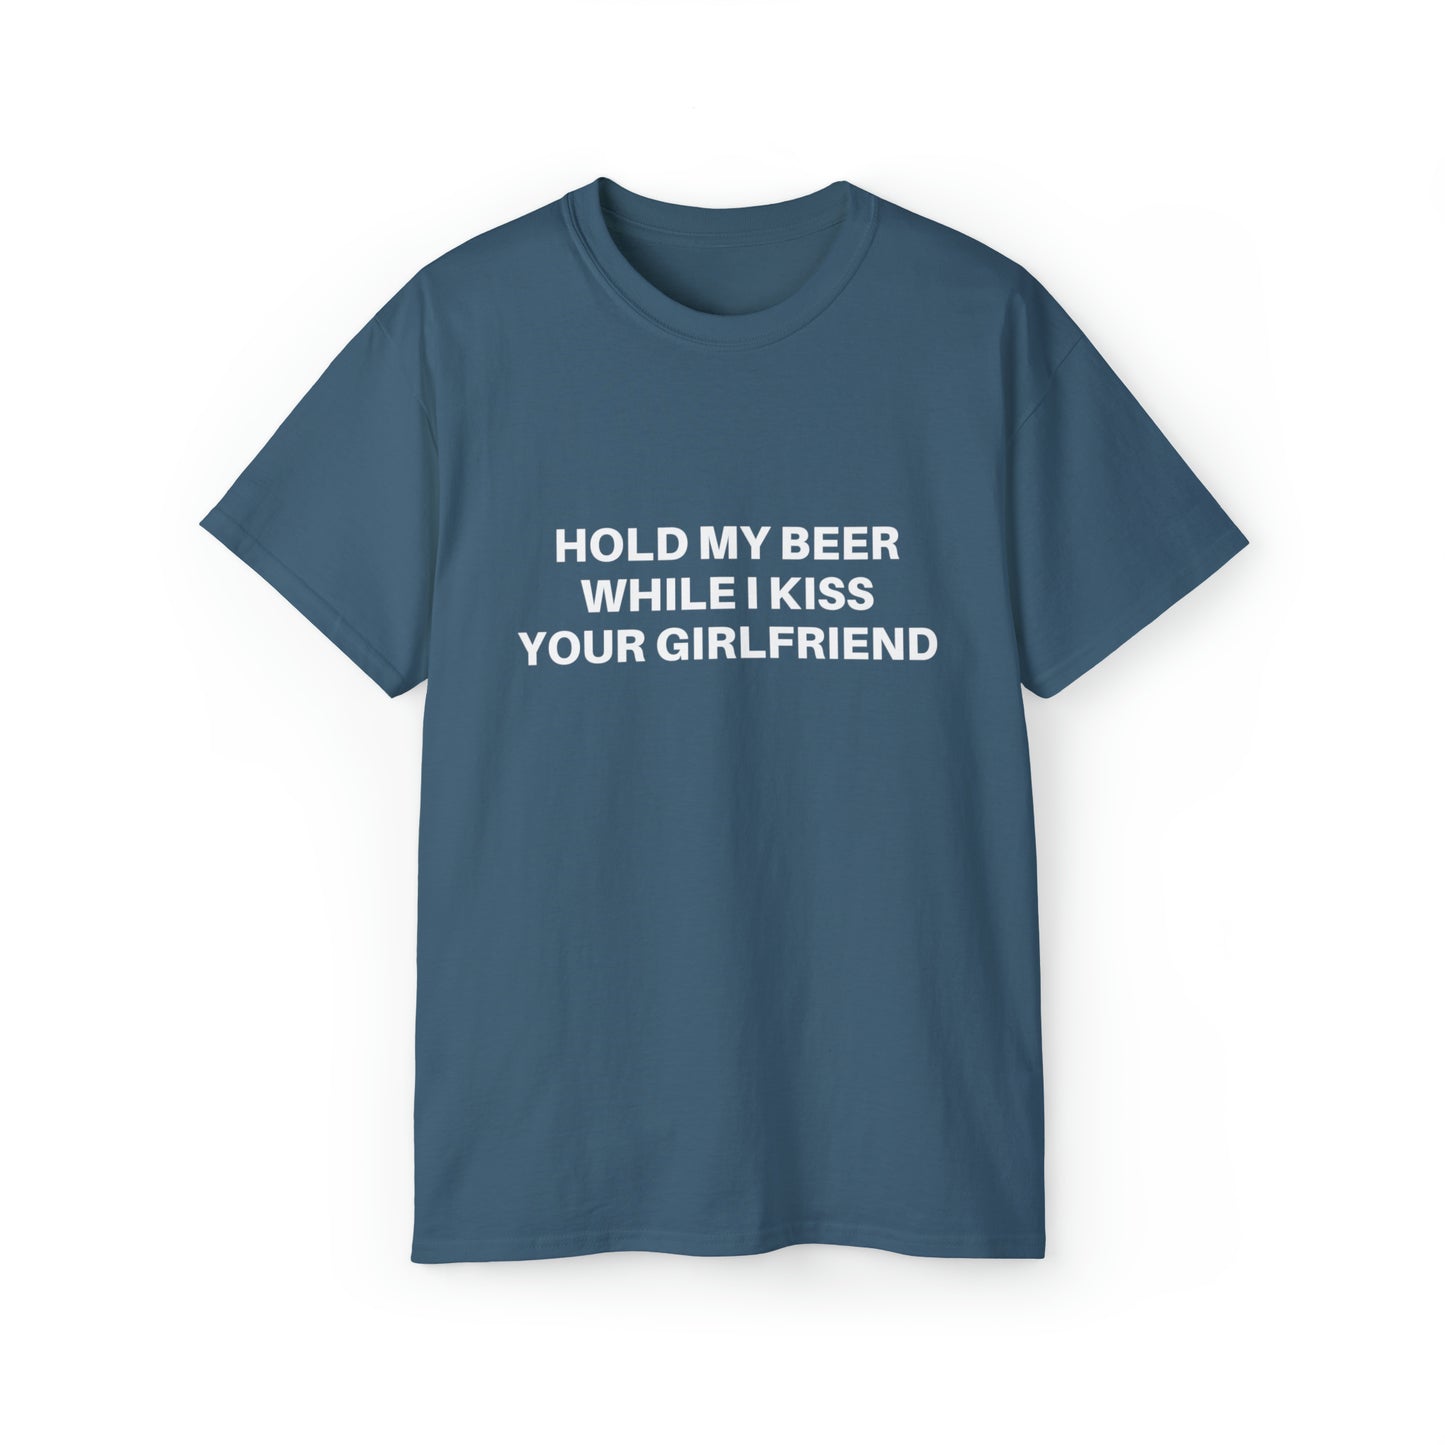 Hold my beer while I kiss your girlfriend | Tee